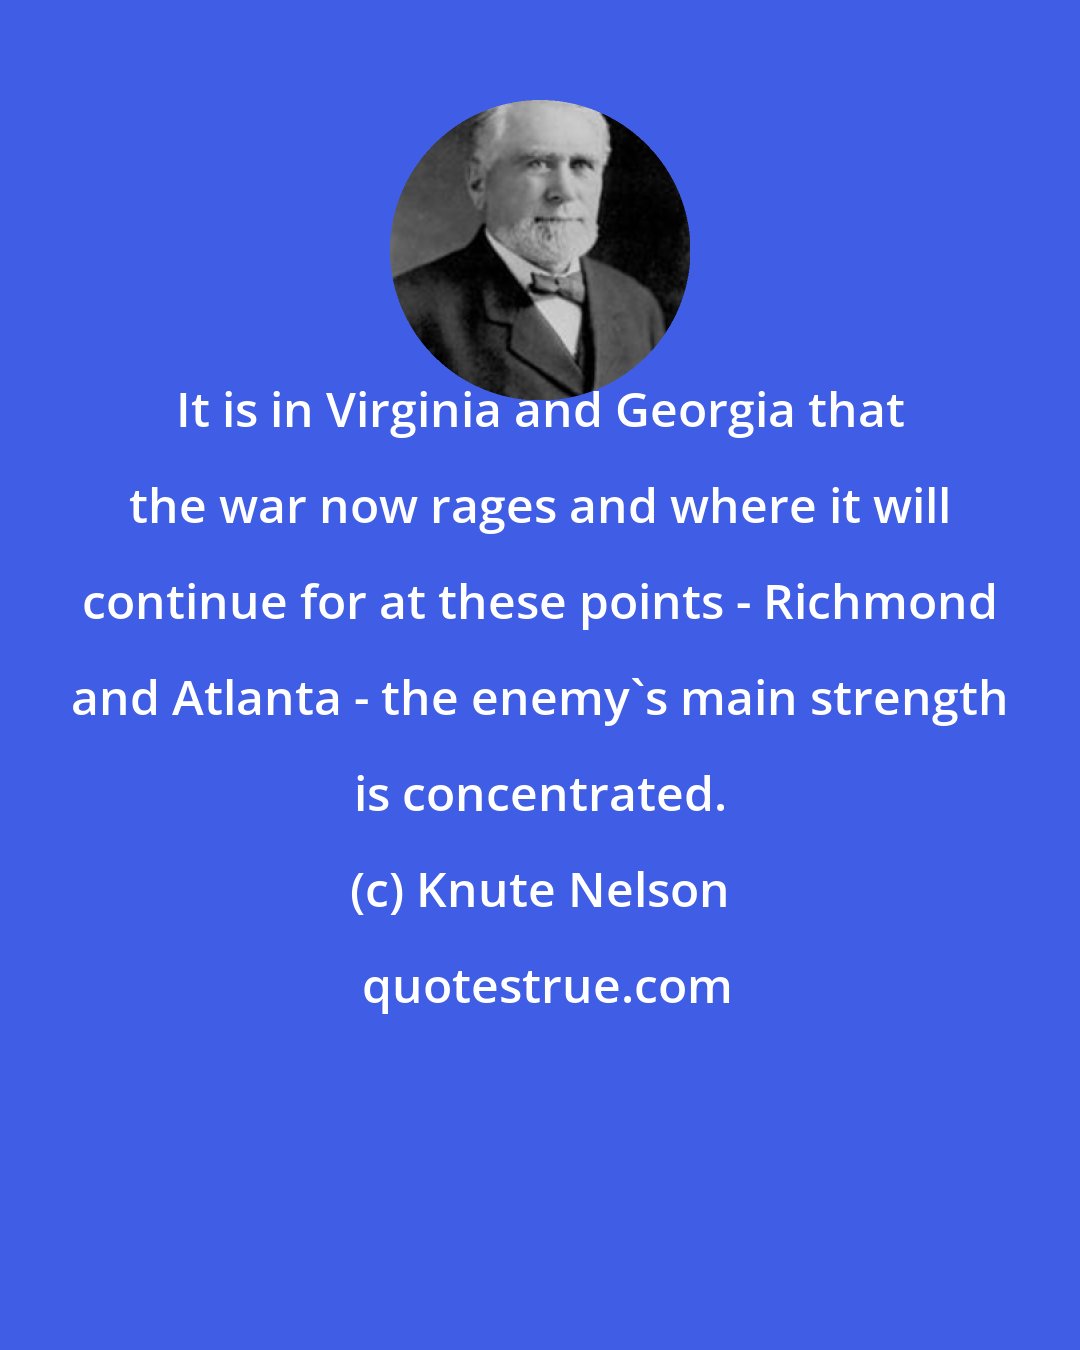 Knute Nelson: It is in Virginia and Georgia that the war now rages and where it will continue for at these points - Richmond and Atlanta - the enemy's main strength is concentrated.